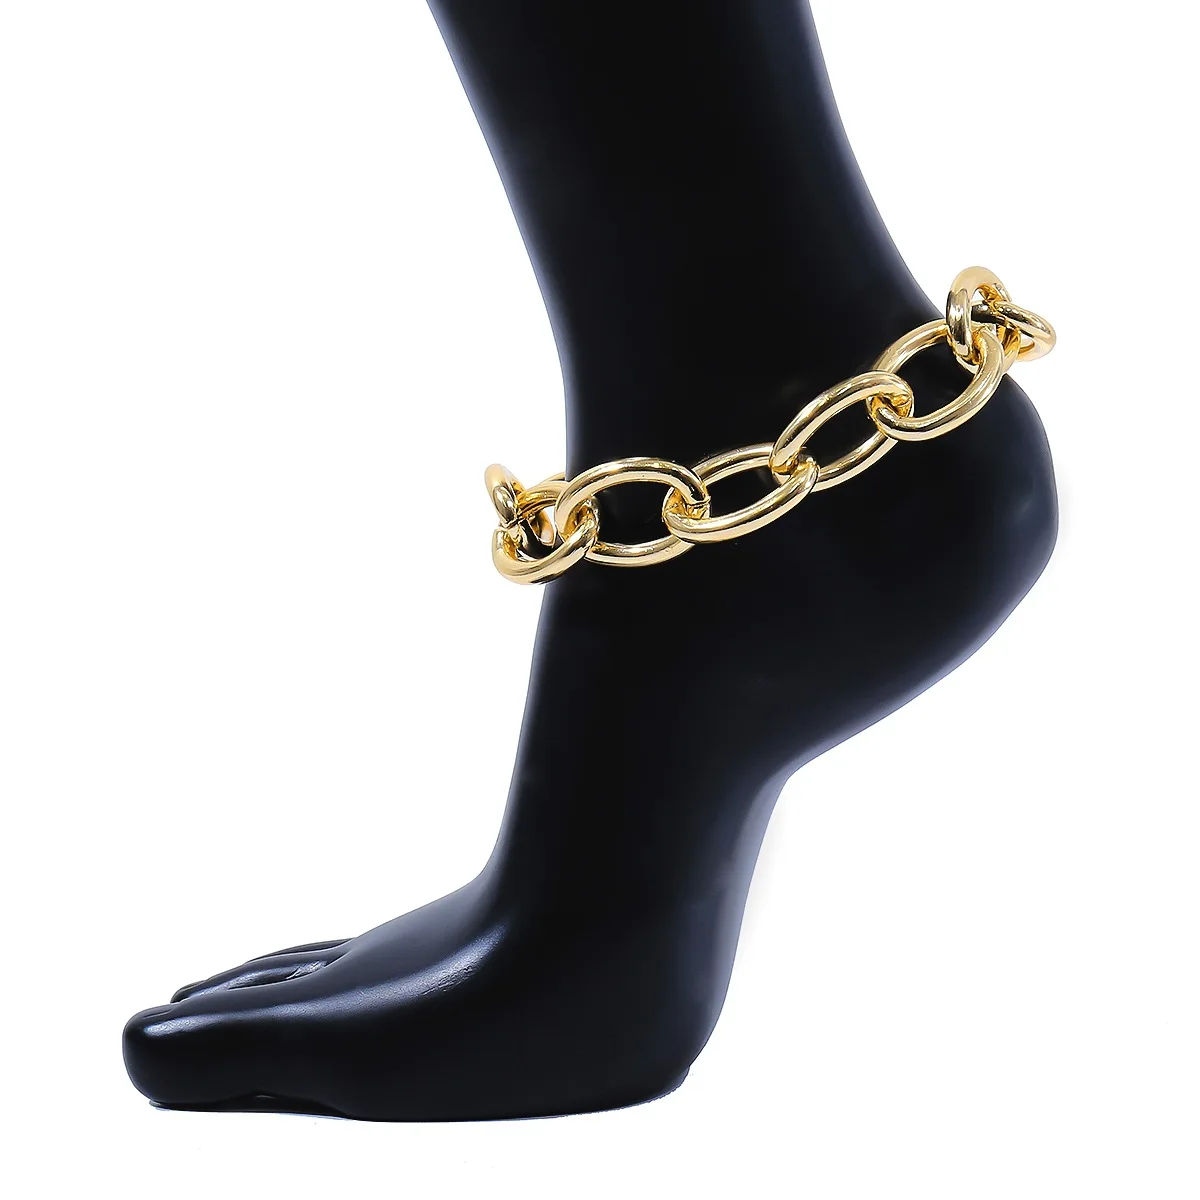 

JUHU 2021 European and American Exaggerated retro pop aluminum chain foot trim punk hip-hop metal anklet fashion foot ornaments, Golden sliver